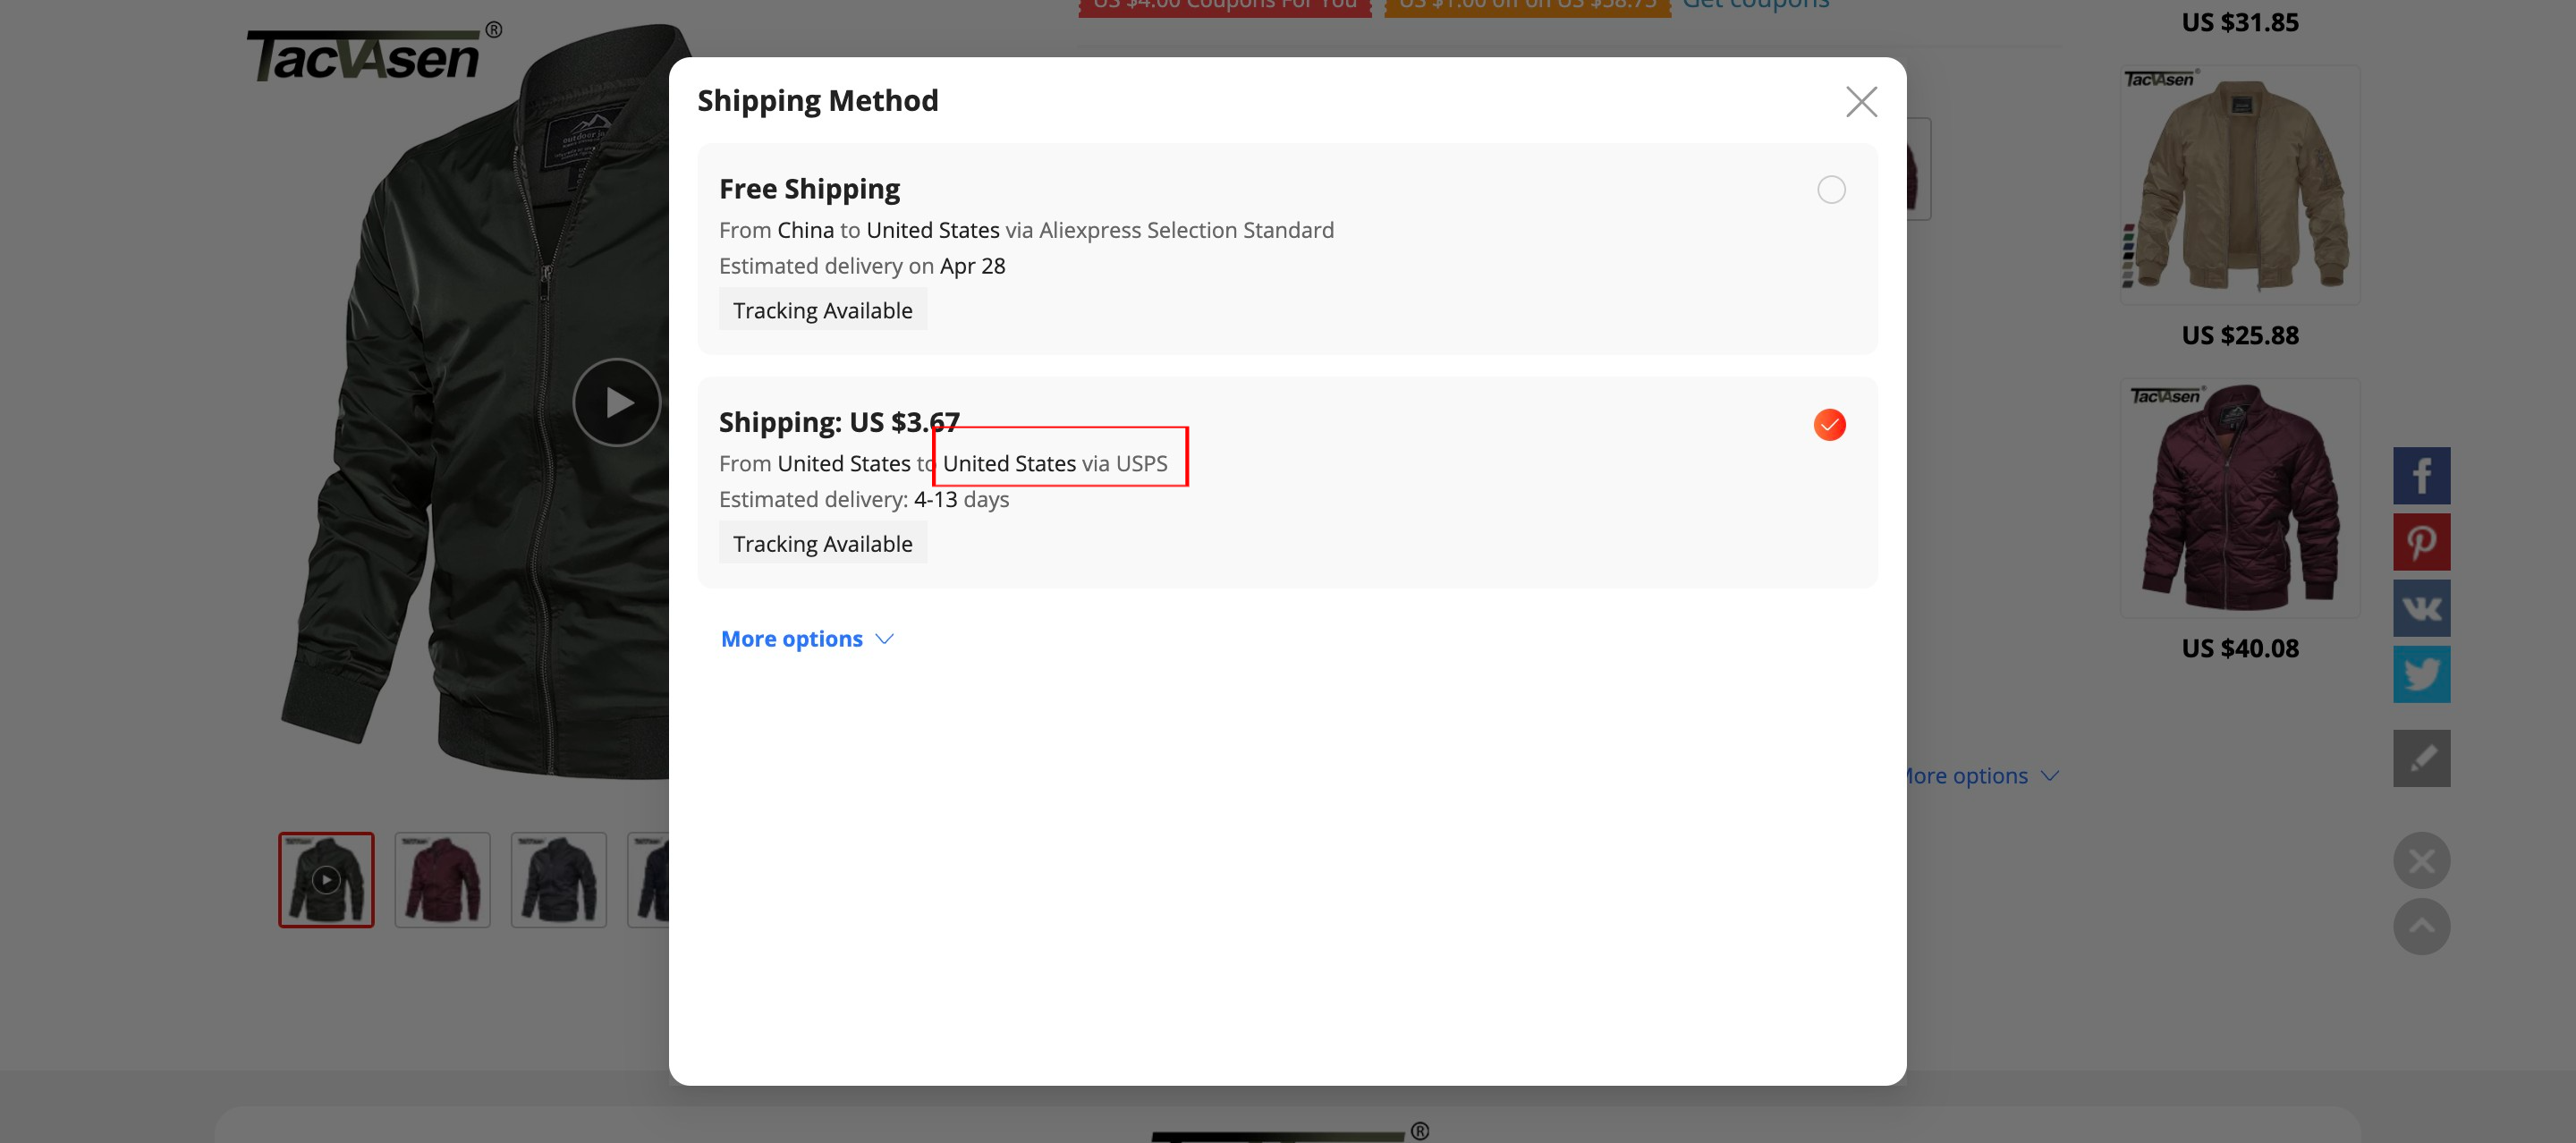 Tip2: Check the suppliers shipping method